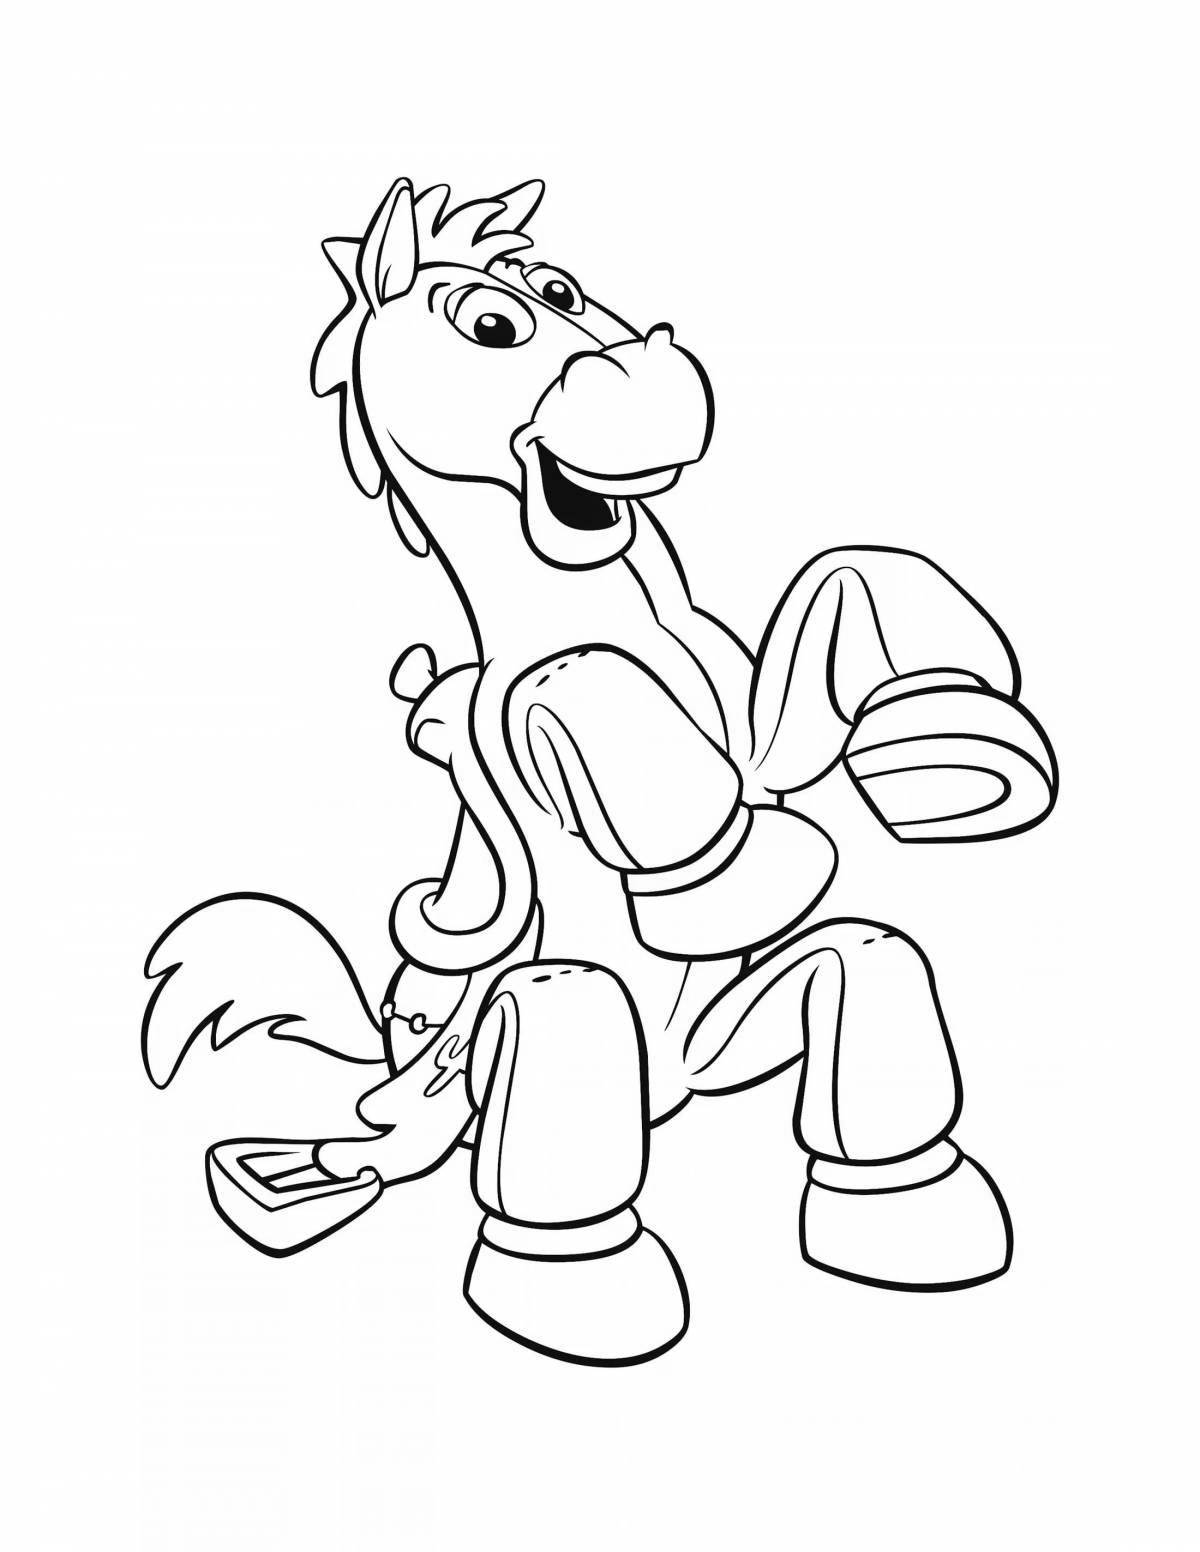 Animated cartoon horse coloring page